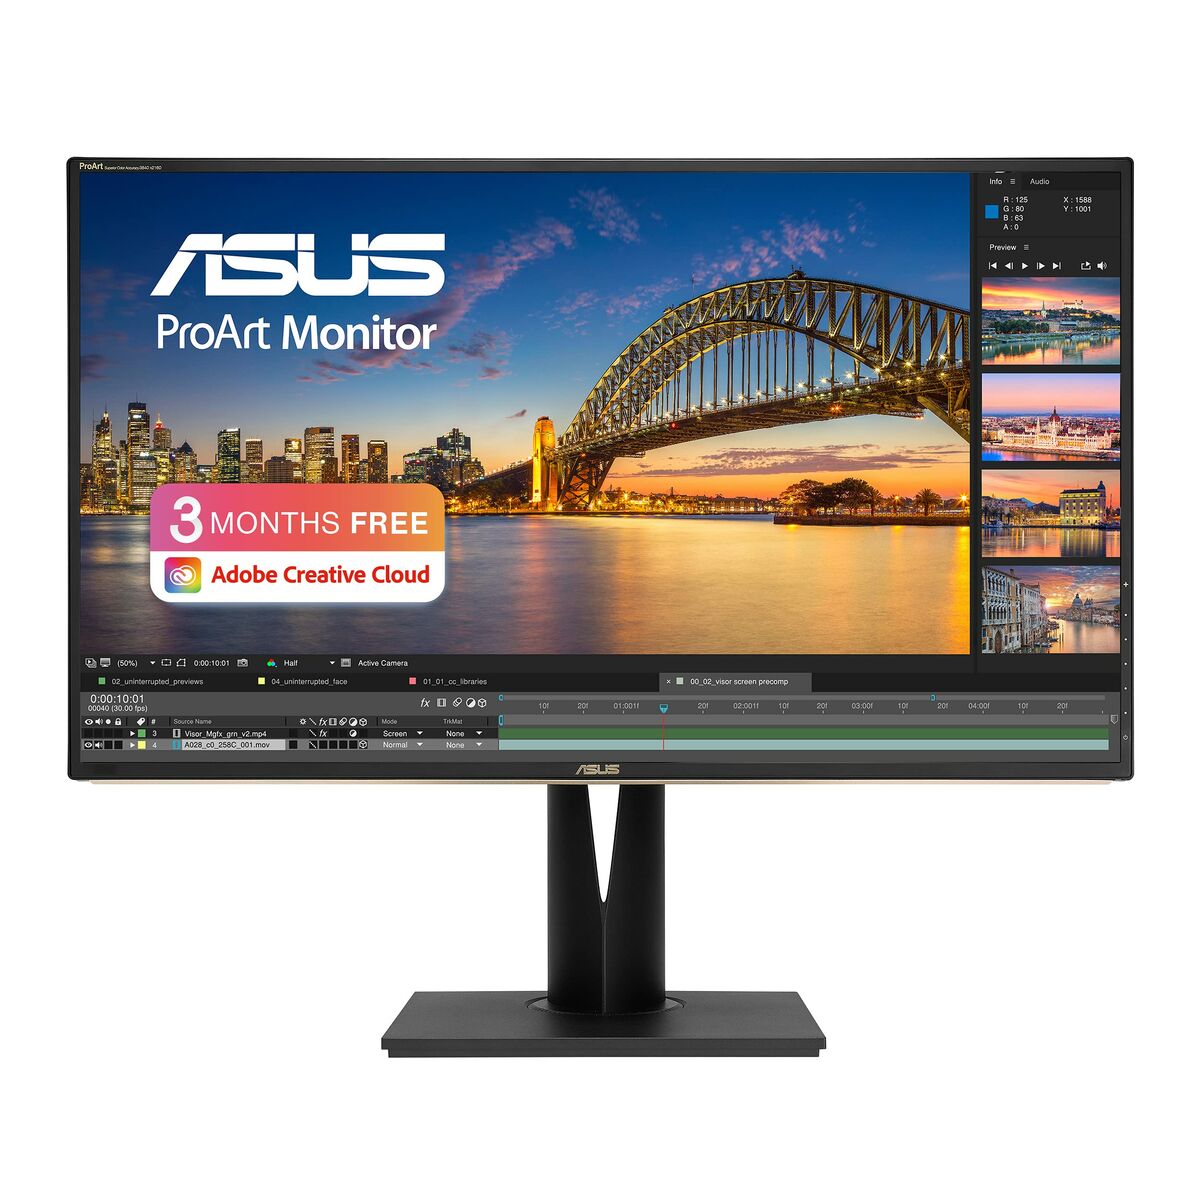 Monitor Asus ProArt PA329C 32" IPS LCD Flicker free, Asus, Computing, monitor-asus-proart-pa329c-32-ips-lcd-flicker-free, Brand_Asus, category-reference-2609, category-reference-2642, category-reference-2644, category-reference-t-19685, computers / peripherals, Condition_NEW, office, Price_+ 1000, Teleworking, RiotNook